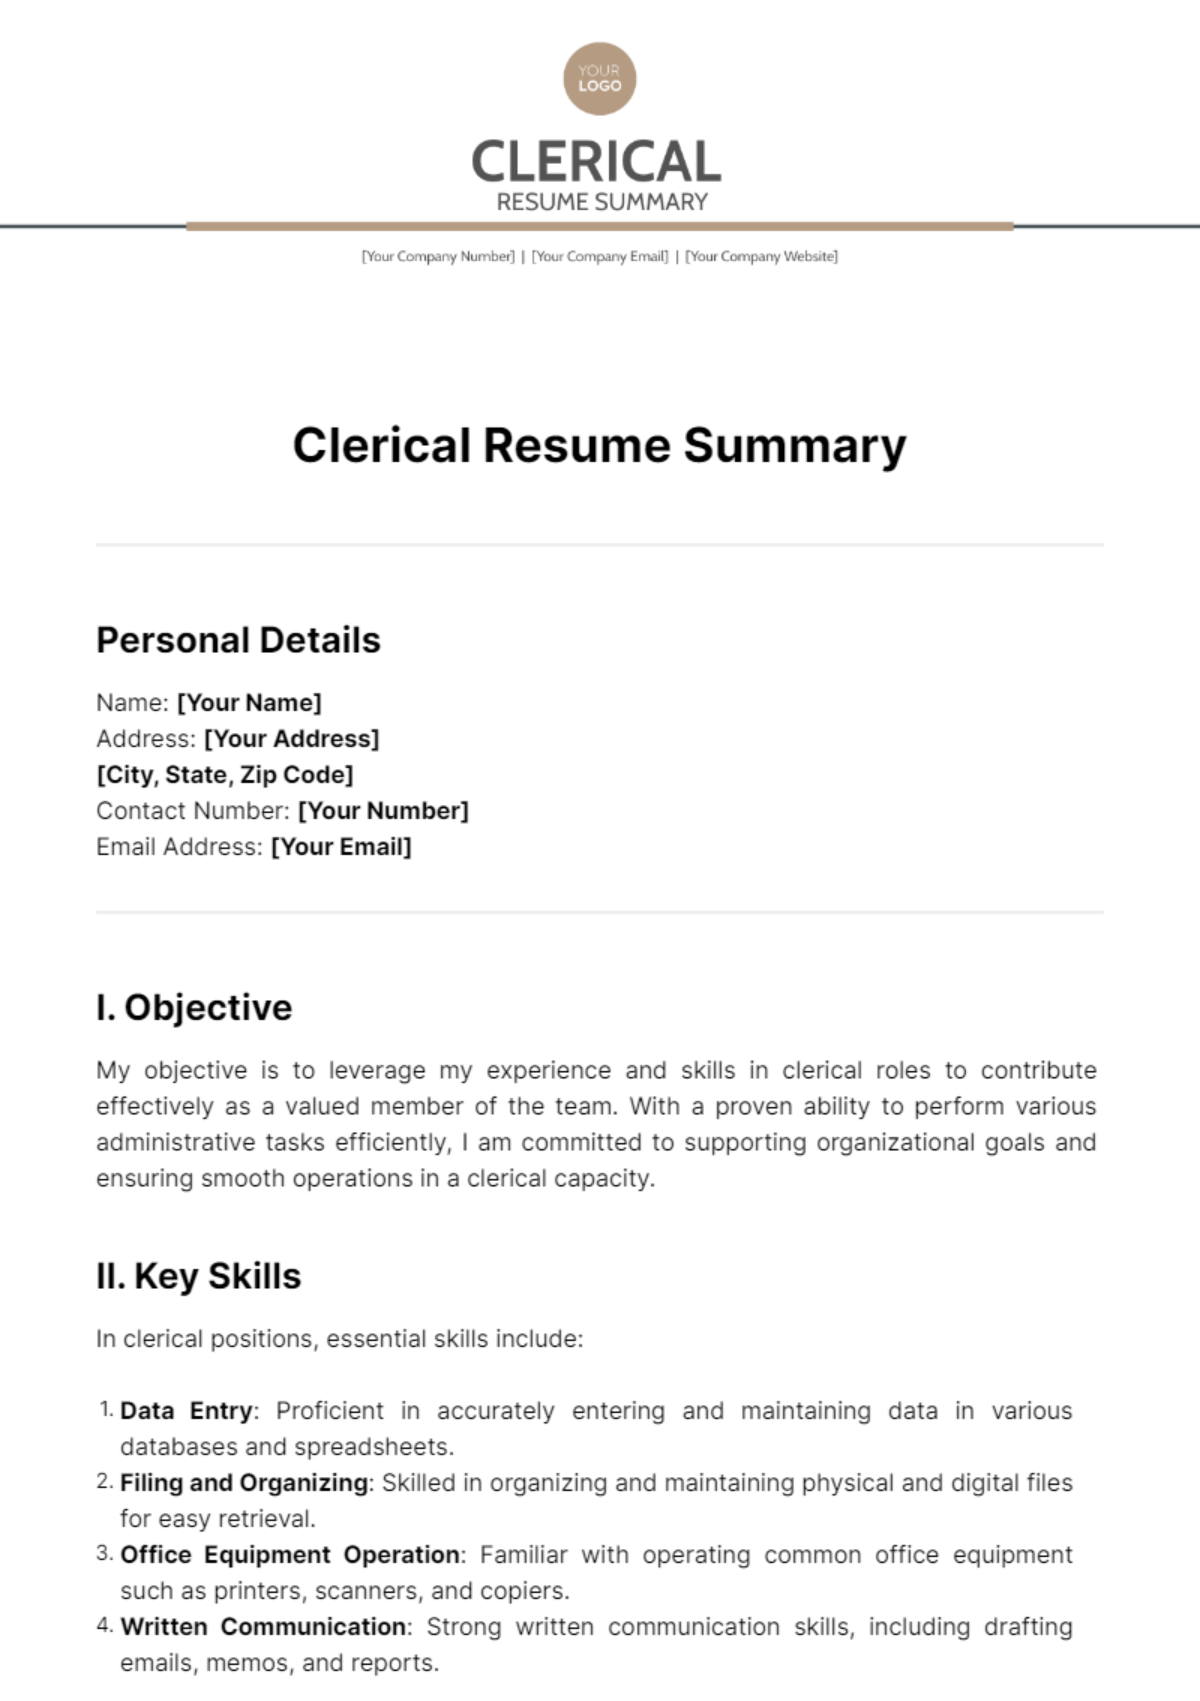 Clerical Resume Summary Template